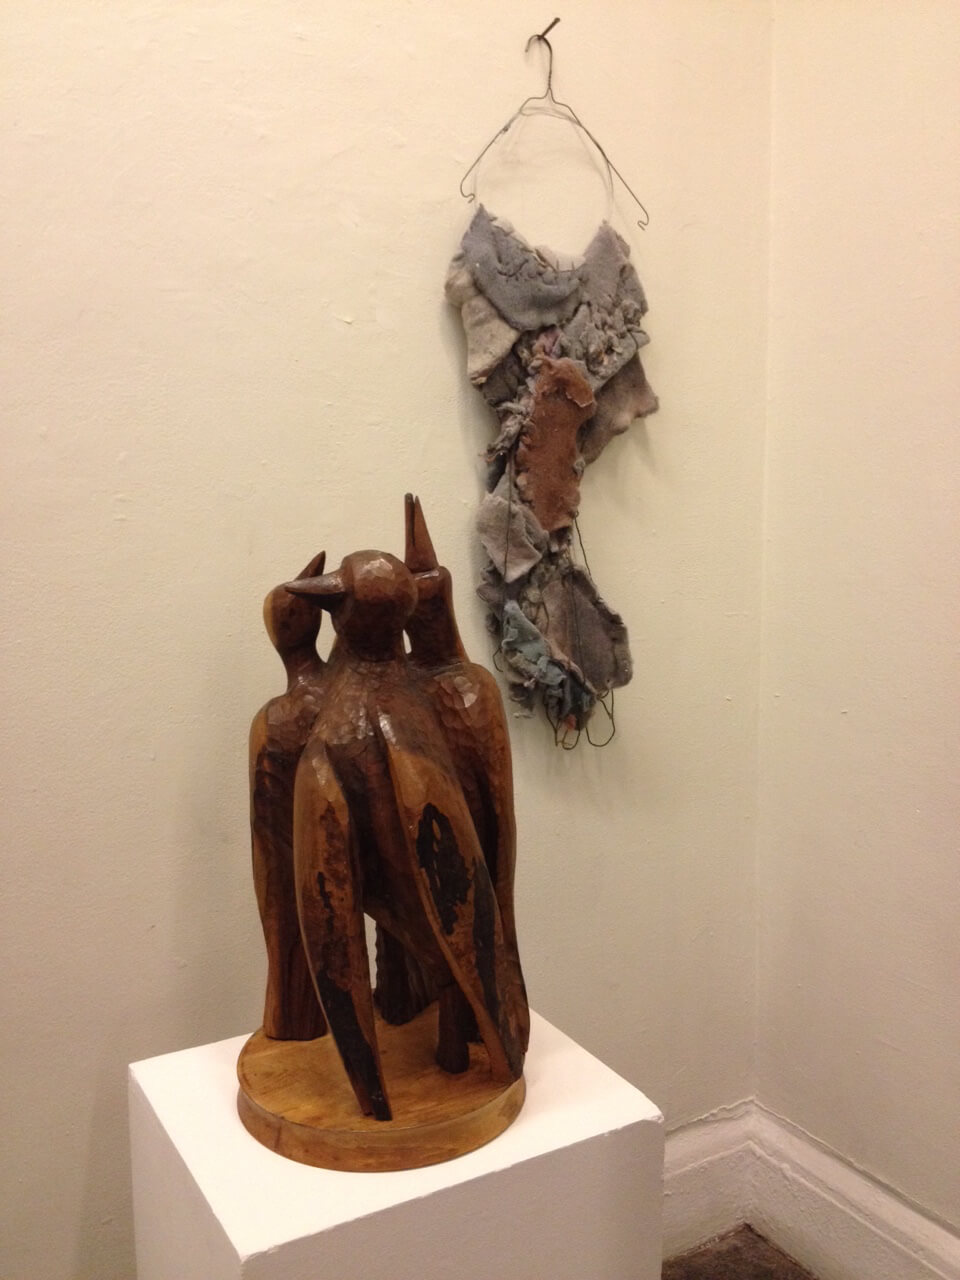 Foreground, a sculpture by Lynn Rosenfeld; background, one by Marie Christine Katz. In one of the Andrew rooms.